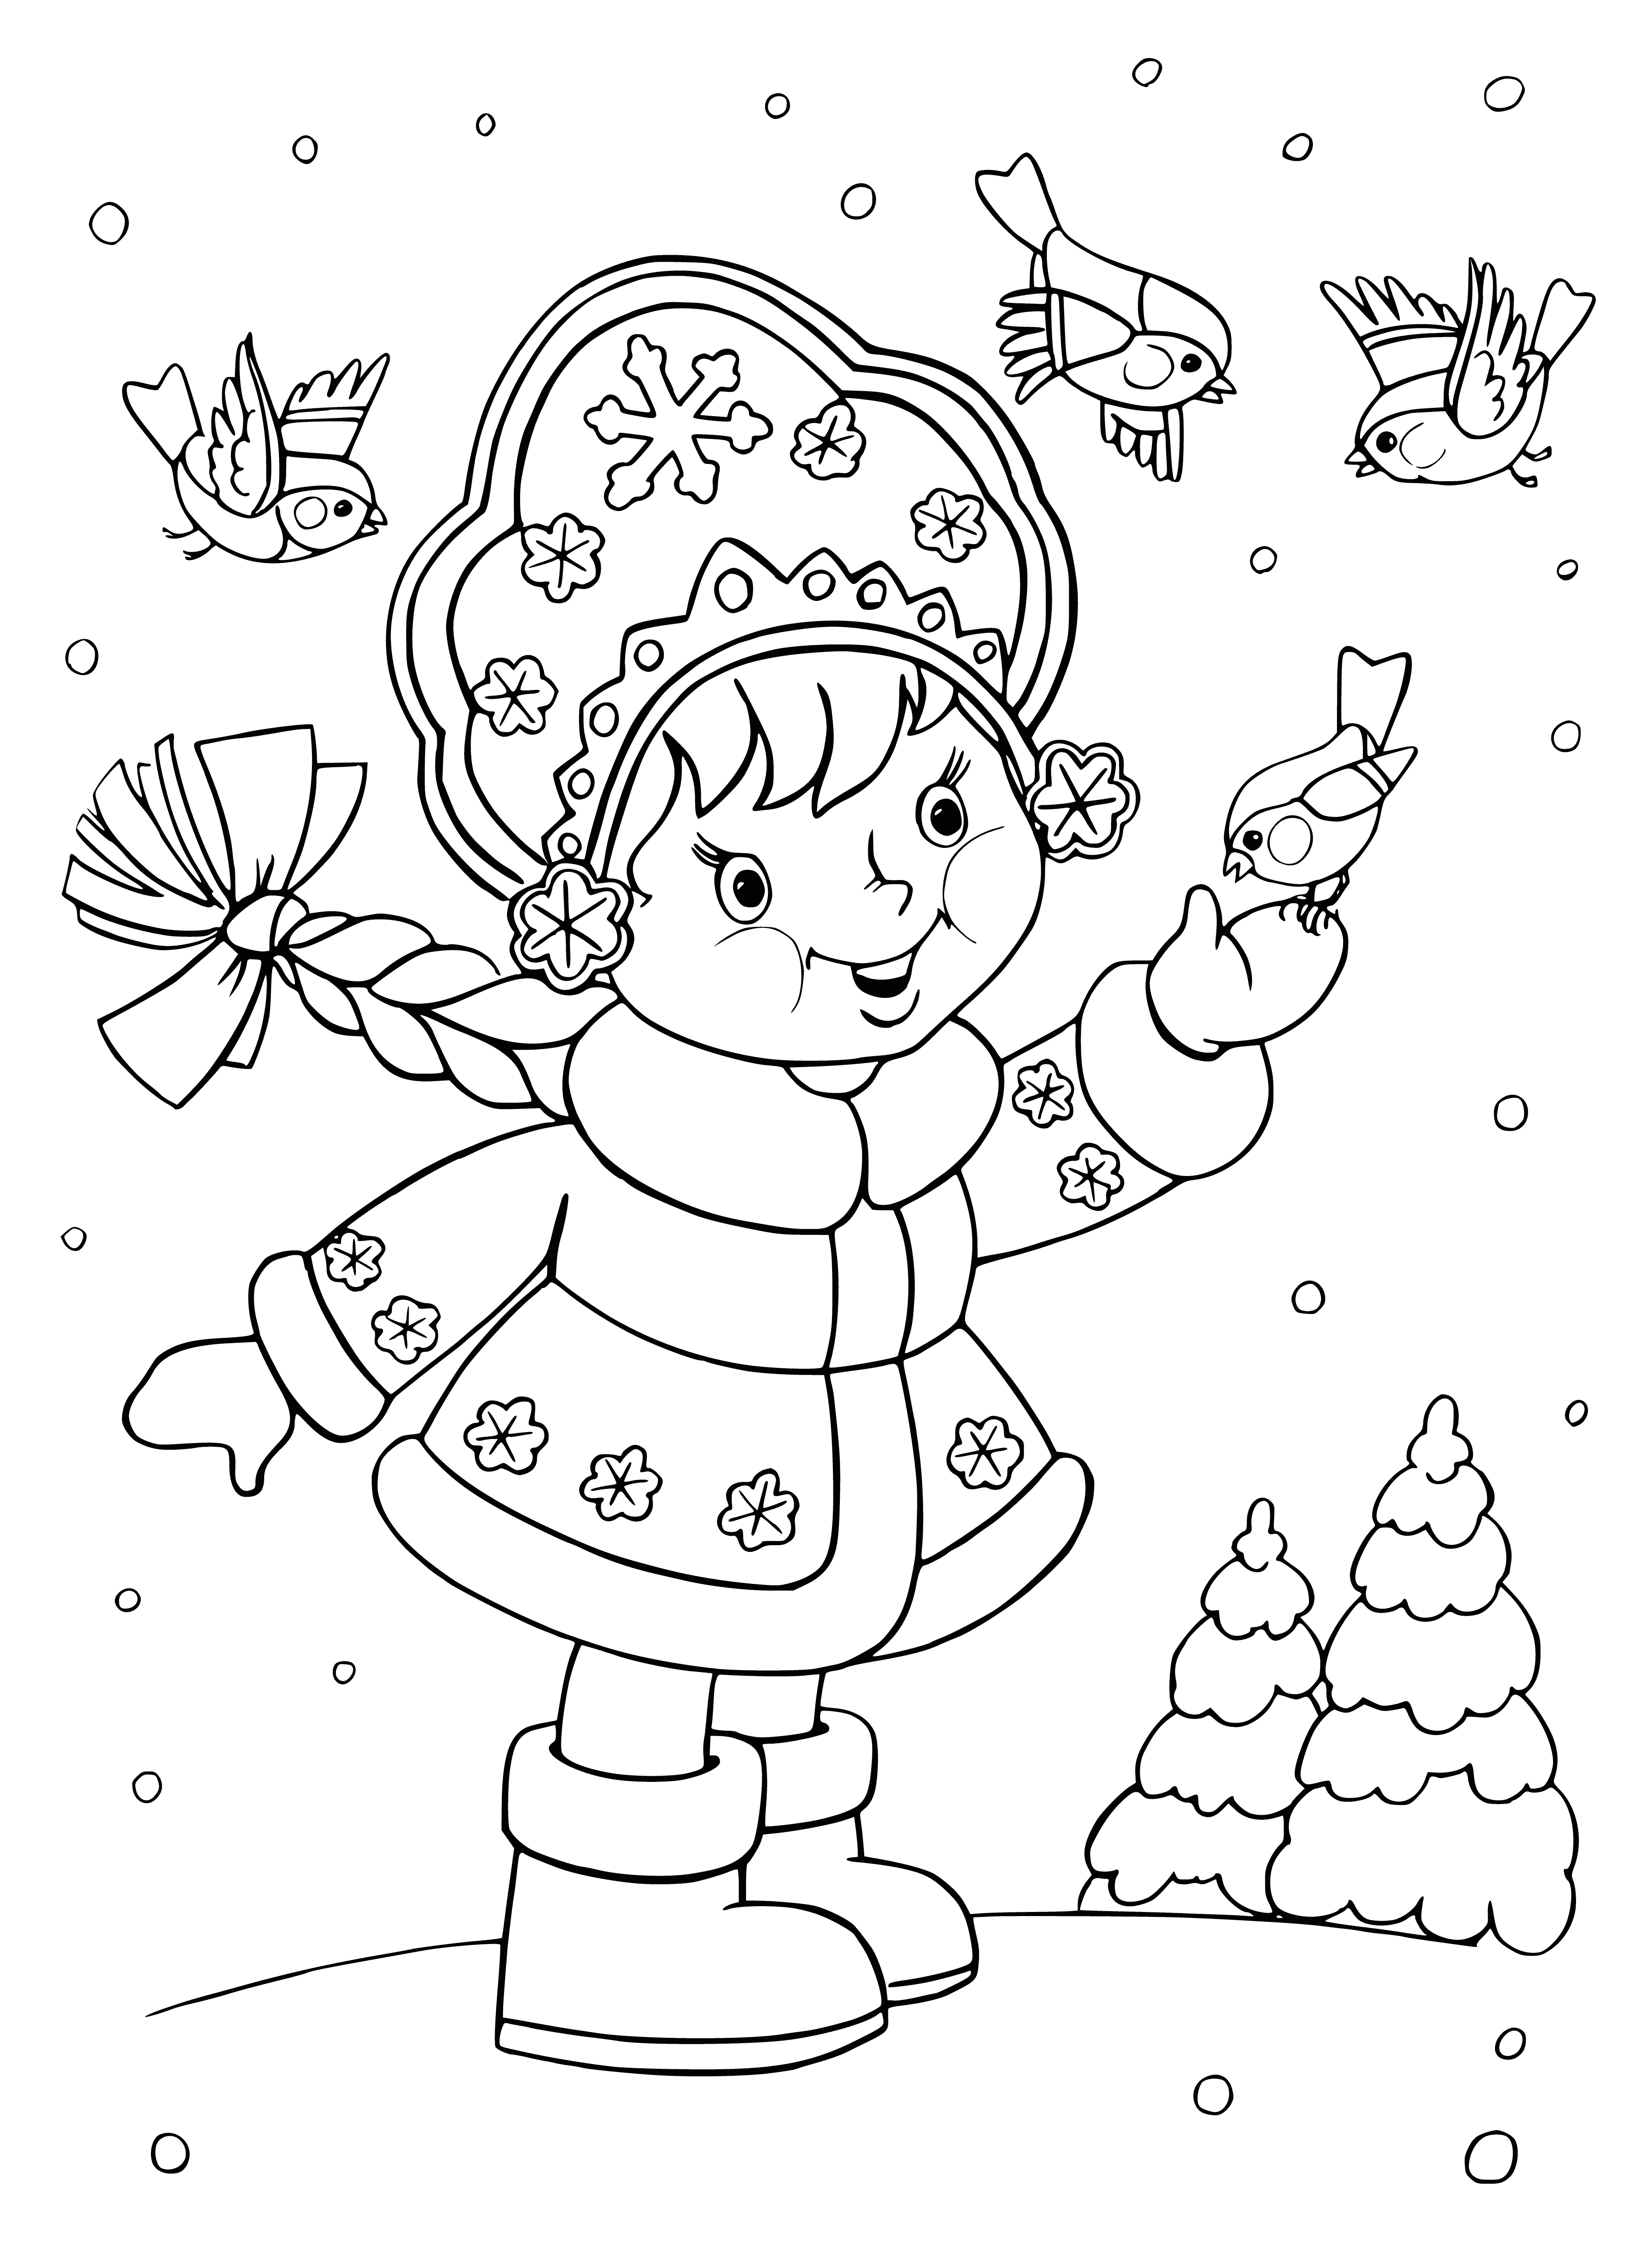 coloring page: Girl of snow made with white skin, blue eyes, ice hair, white dress and cape; a white heart beats in her chest.